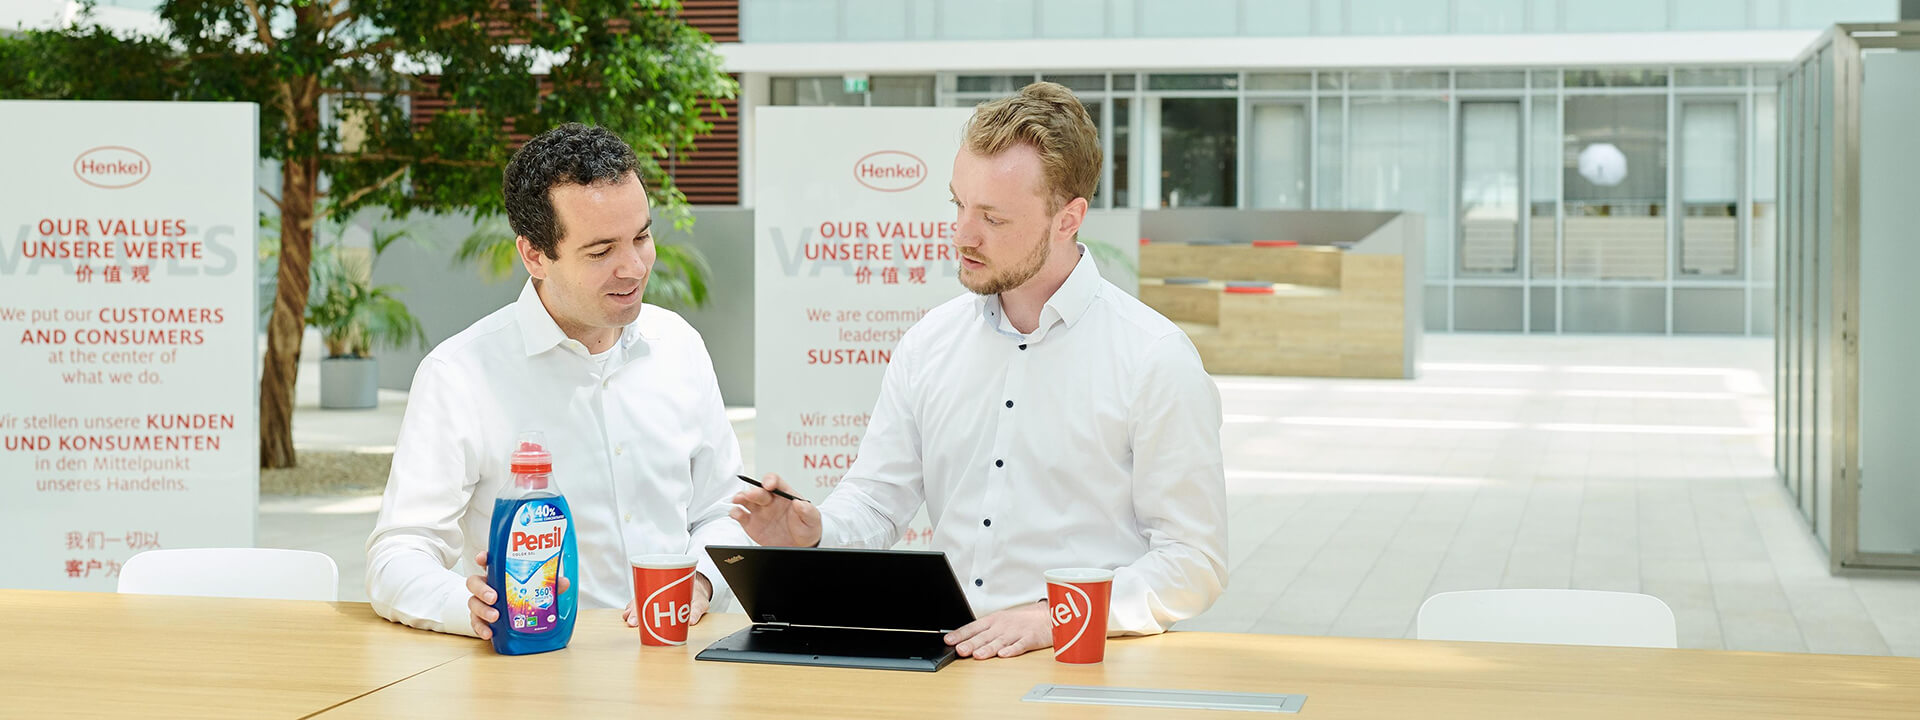 Henkel's Successful Migration to Remote Work: A Digital Transformation Case Study - Unisys Industrial IoT Case Study